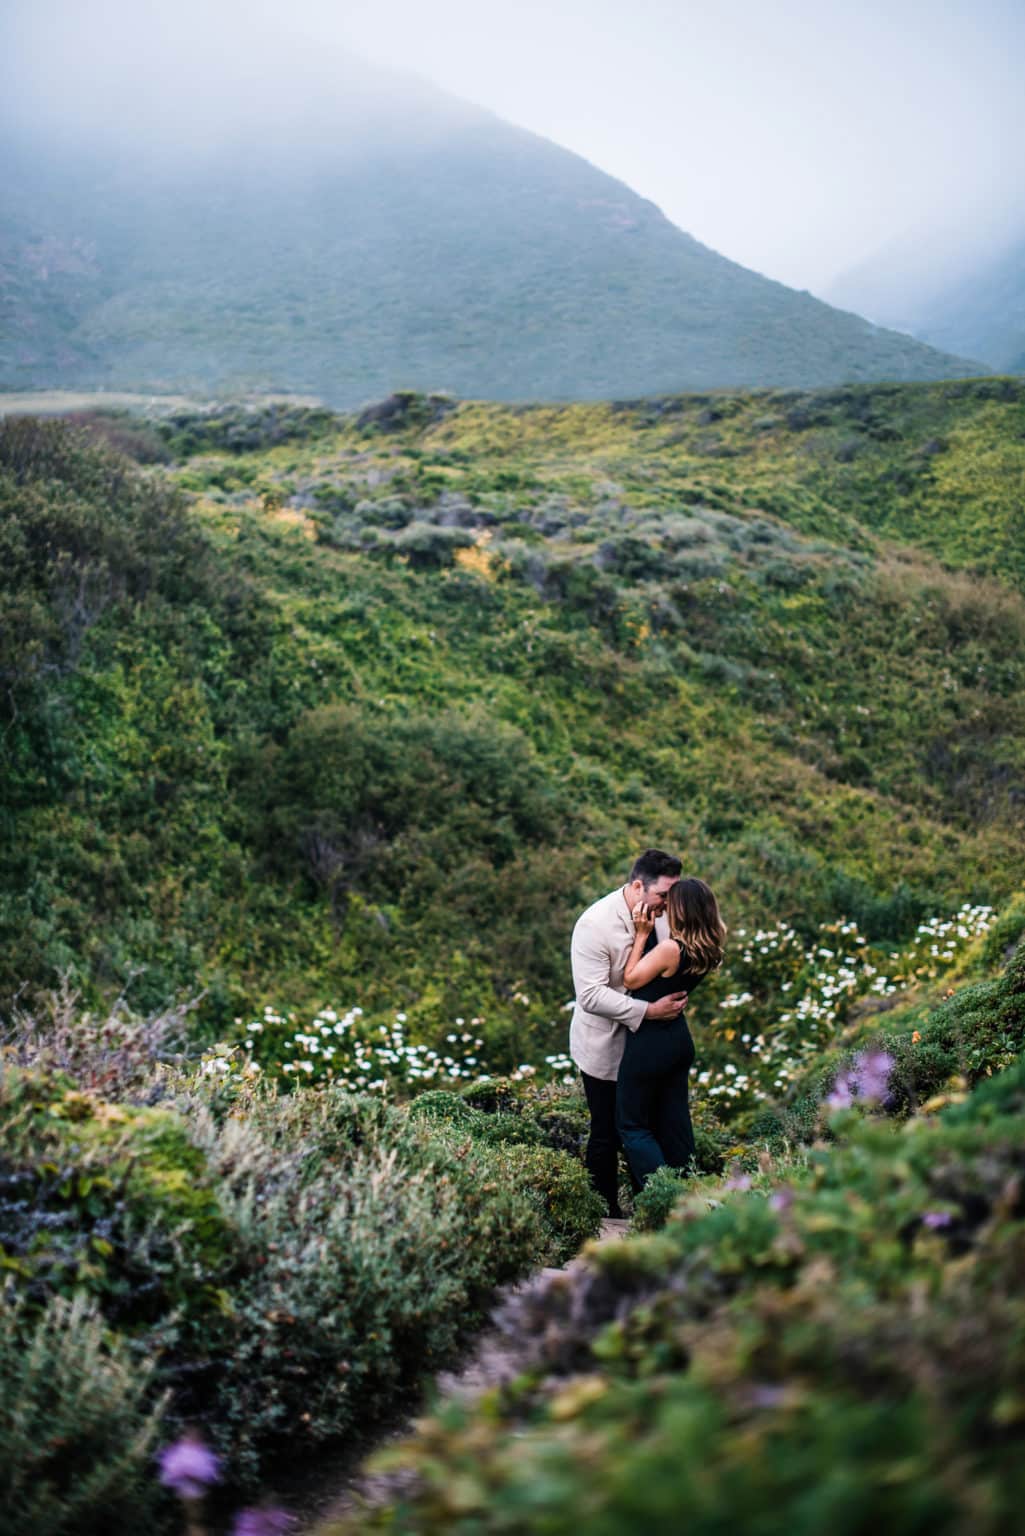 newly eloped couple kissing in the wild grass and shrubs of a private park in California